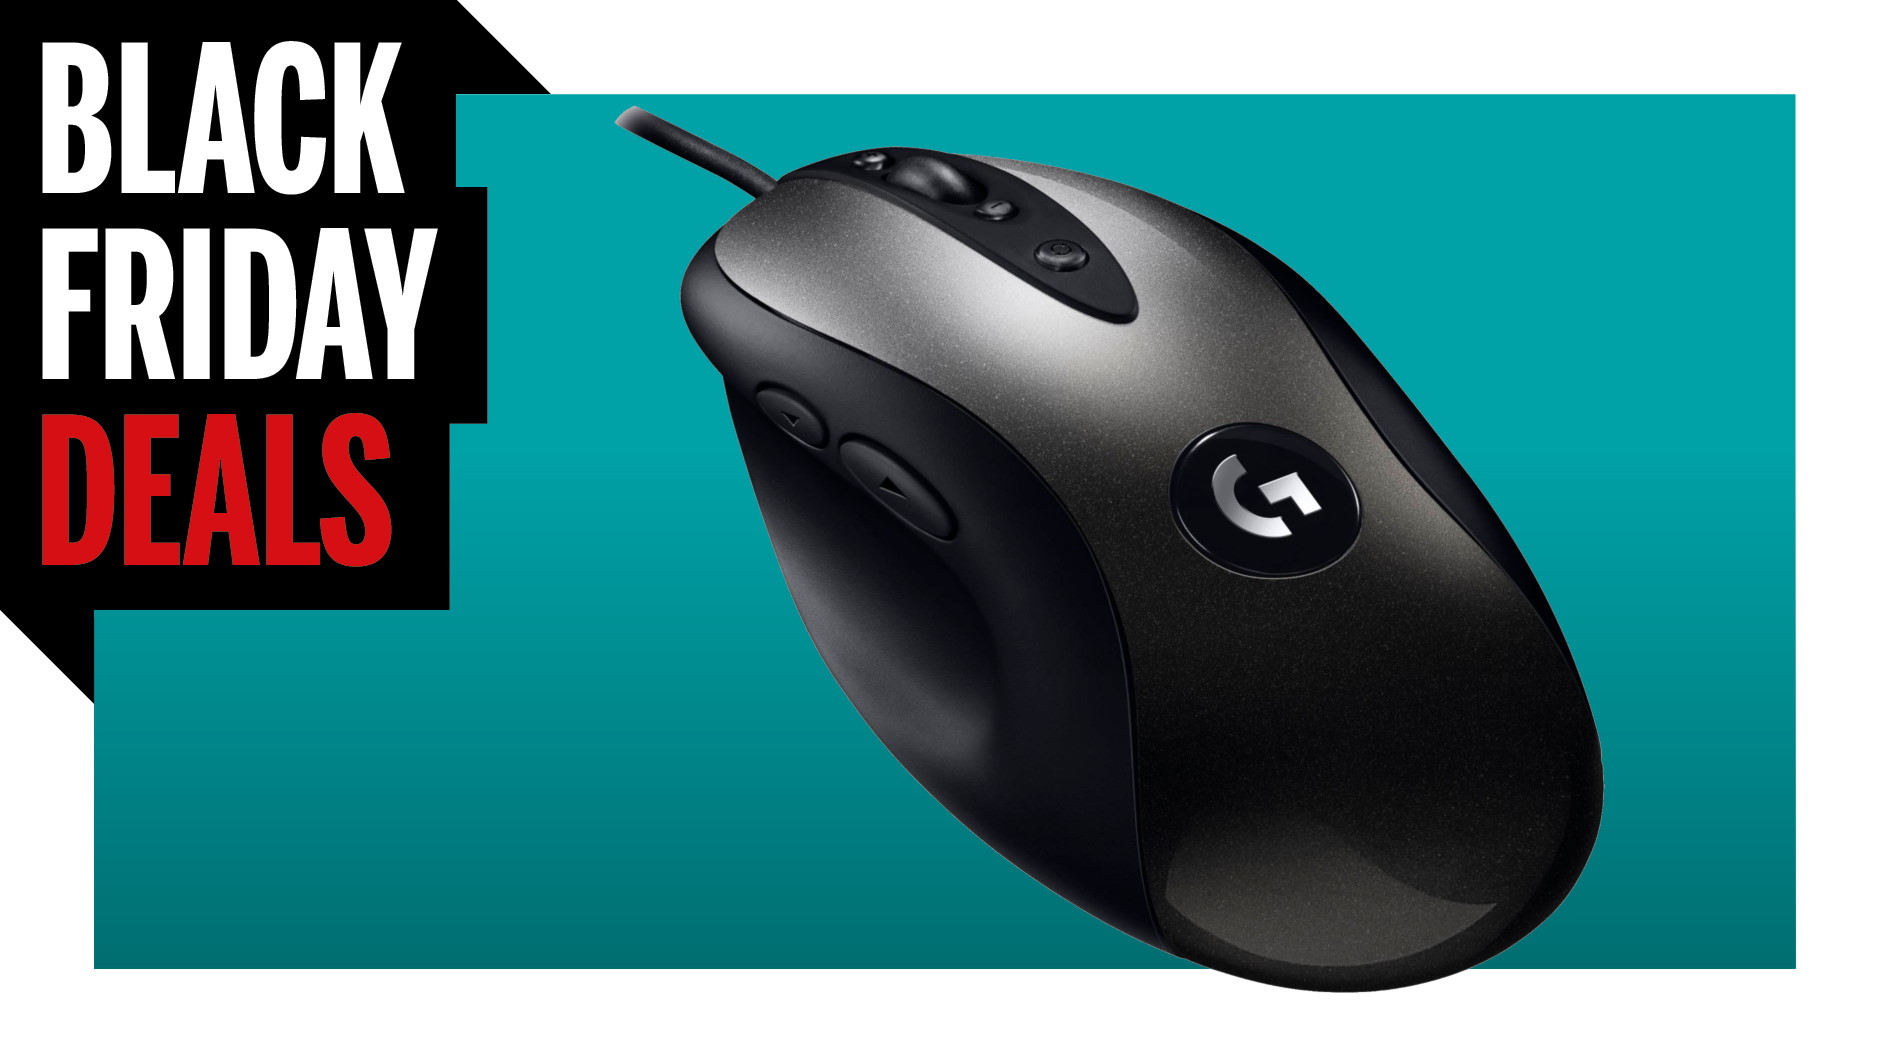  The Logitech MX518, my favorite mouse ever, is half price for Black Friday 